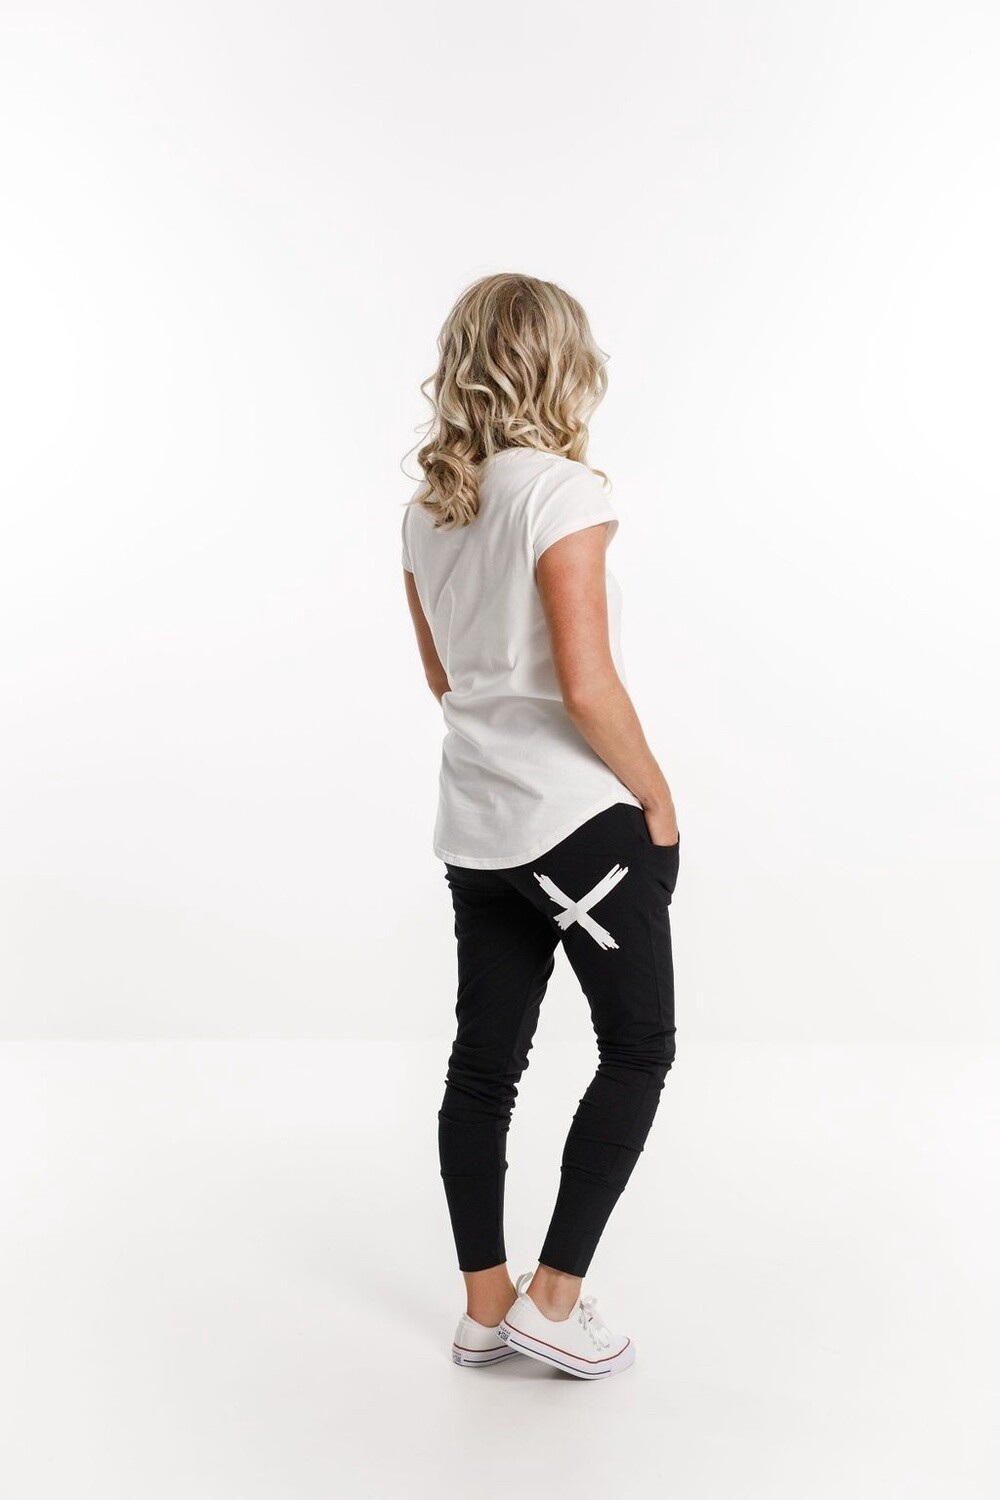 Home-lee Apartment pants- black with white x